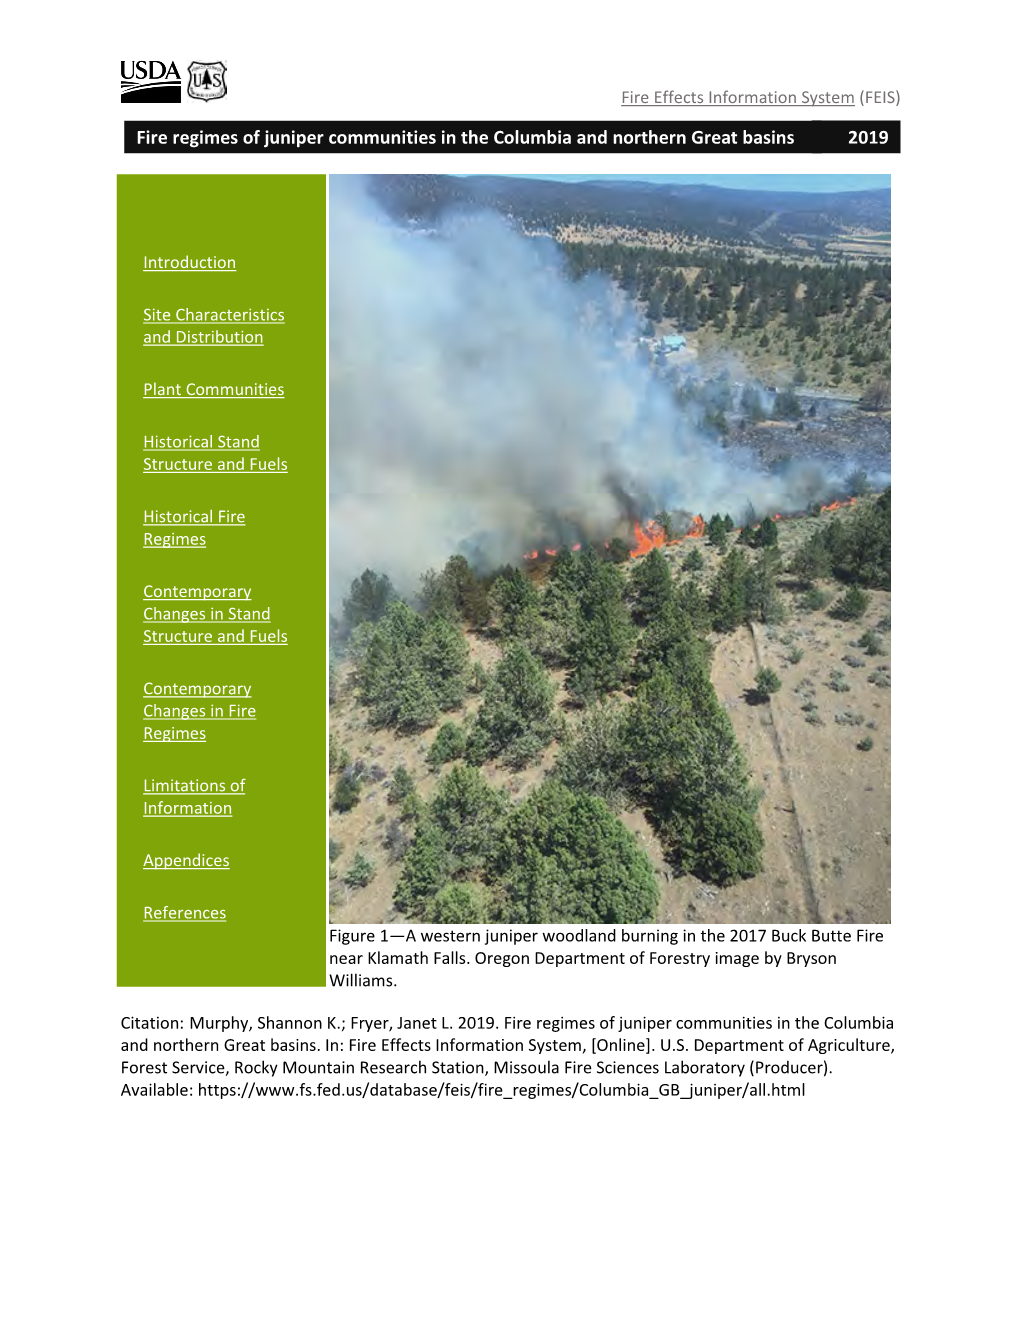 Fire Regimes of Juniper Communities in the Columbia and Northern Great Basins 2019